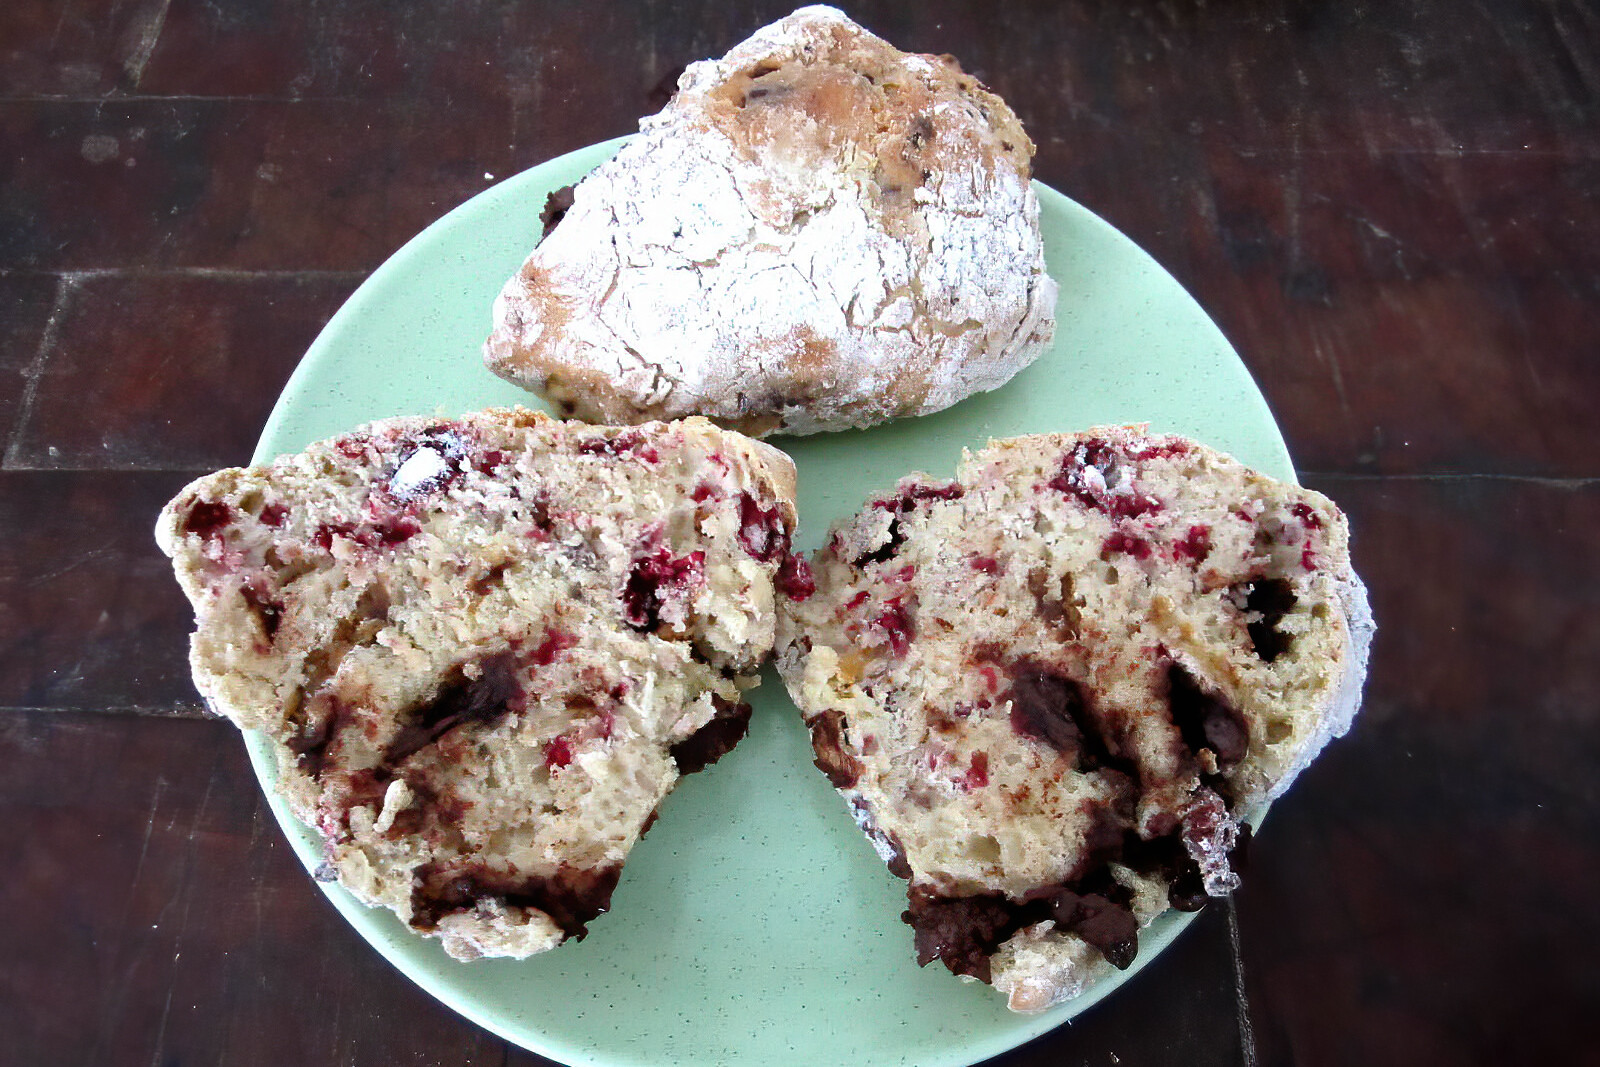 Raspberry scones on a teal plate